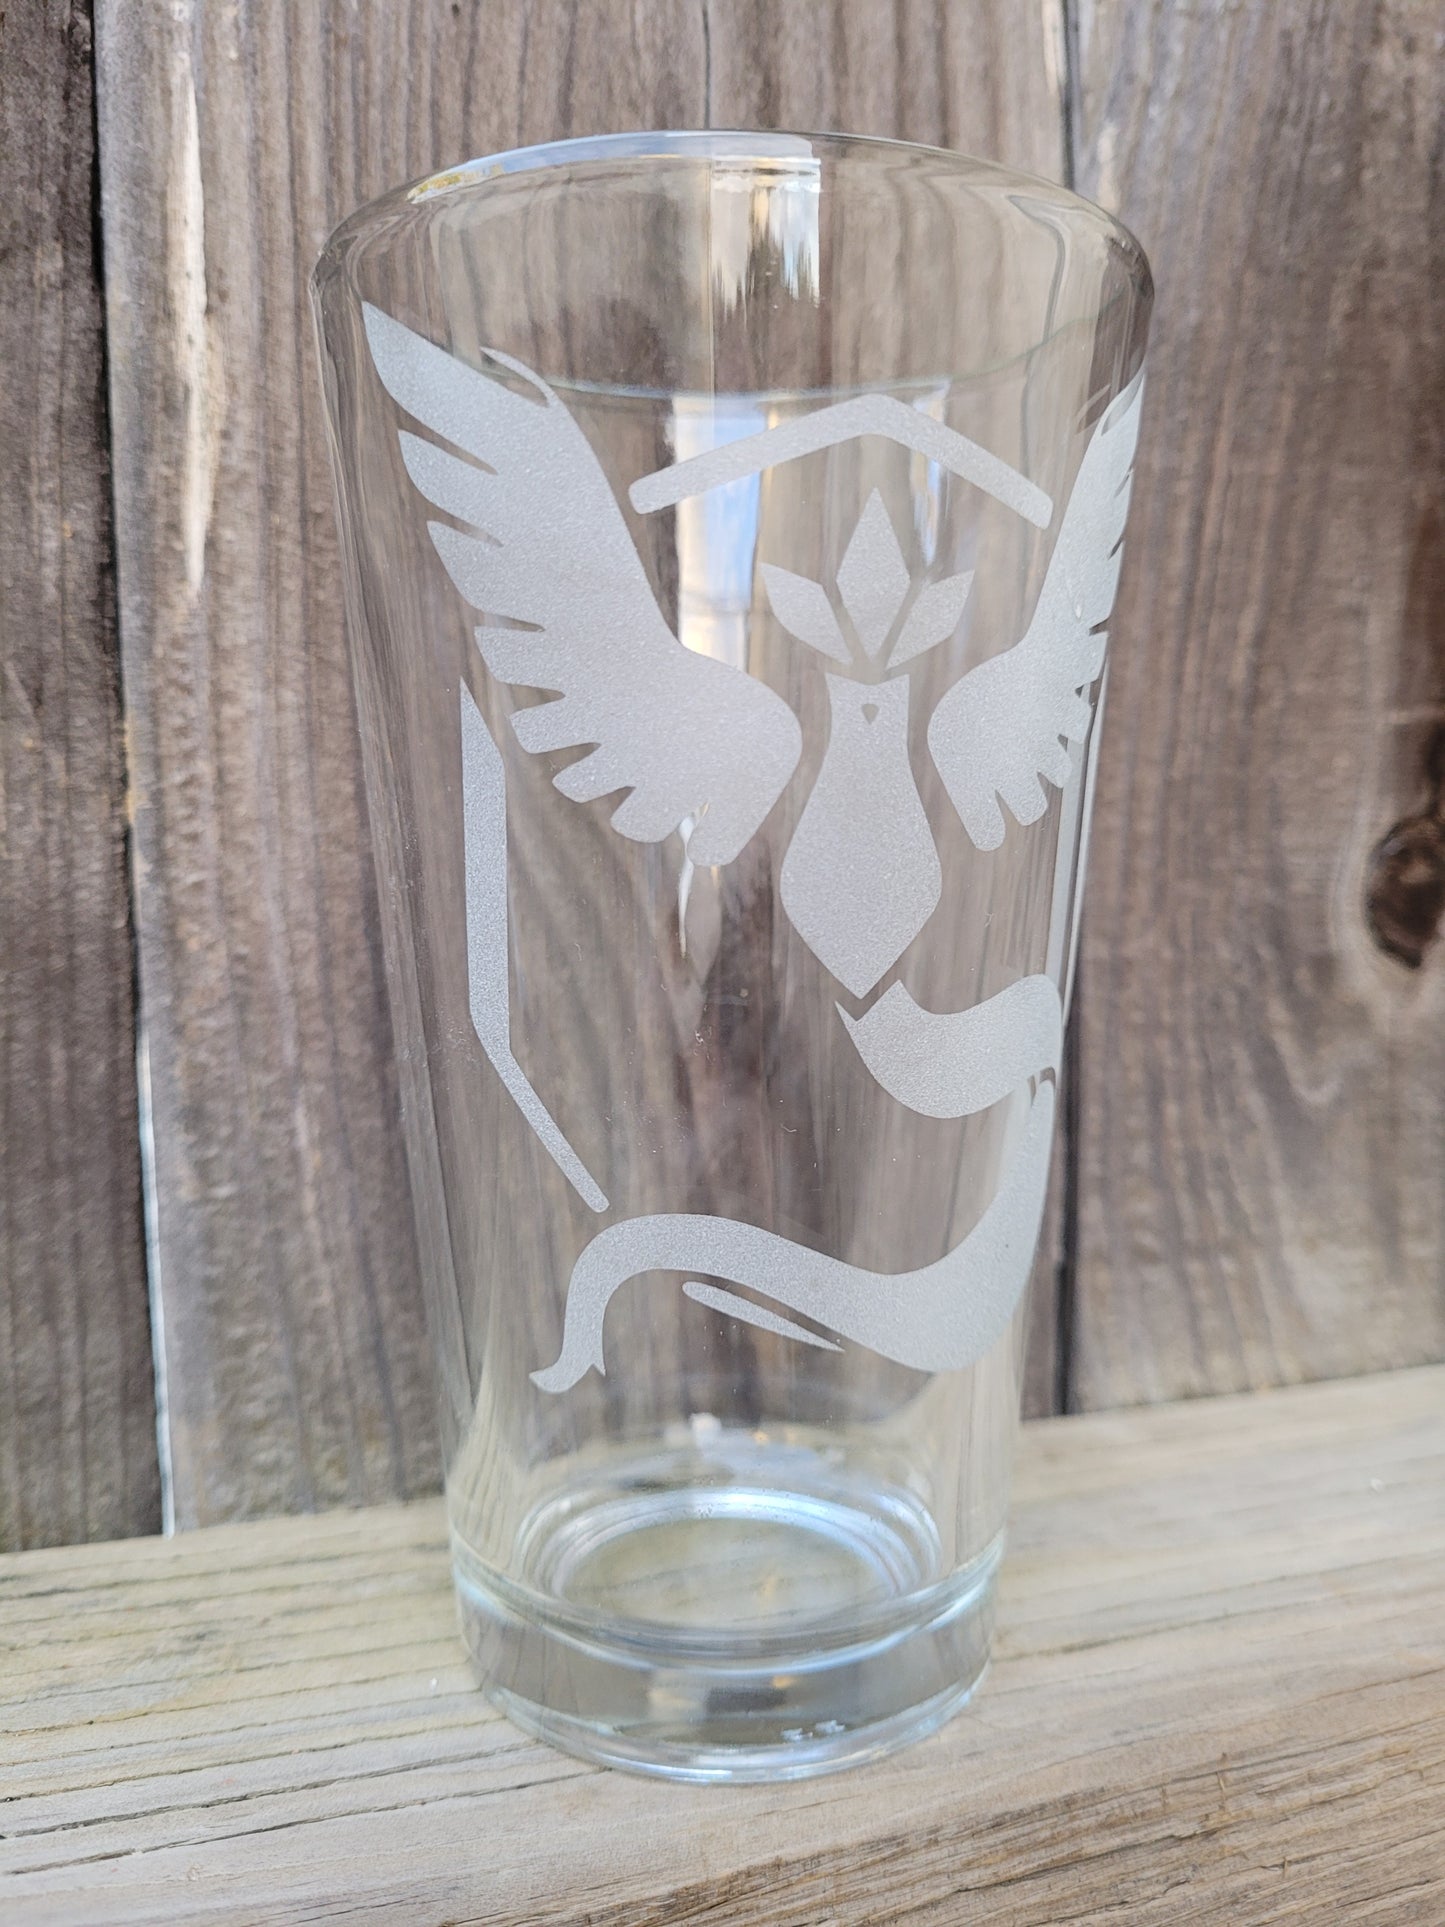 Team Mystic Pint Glass - Made to Order